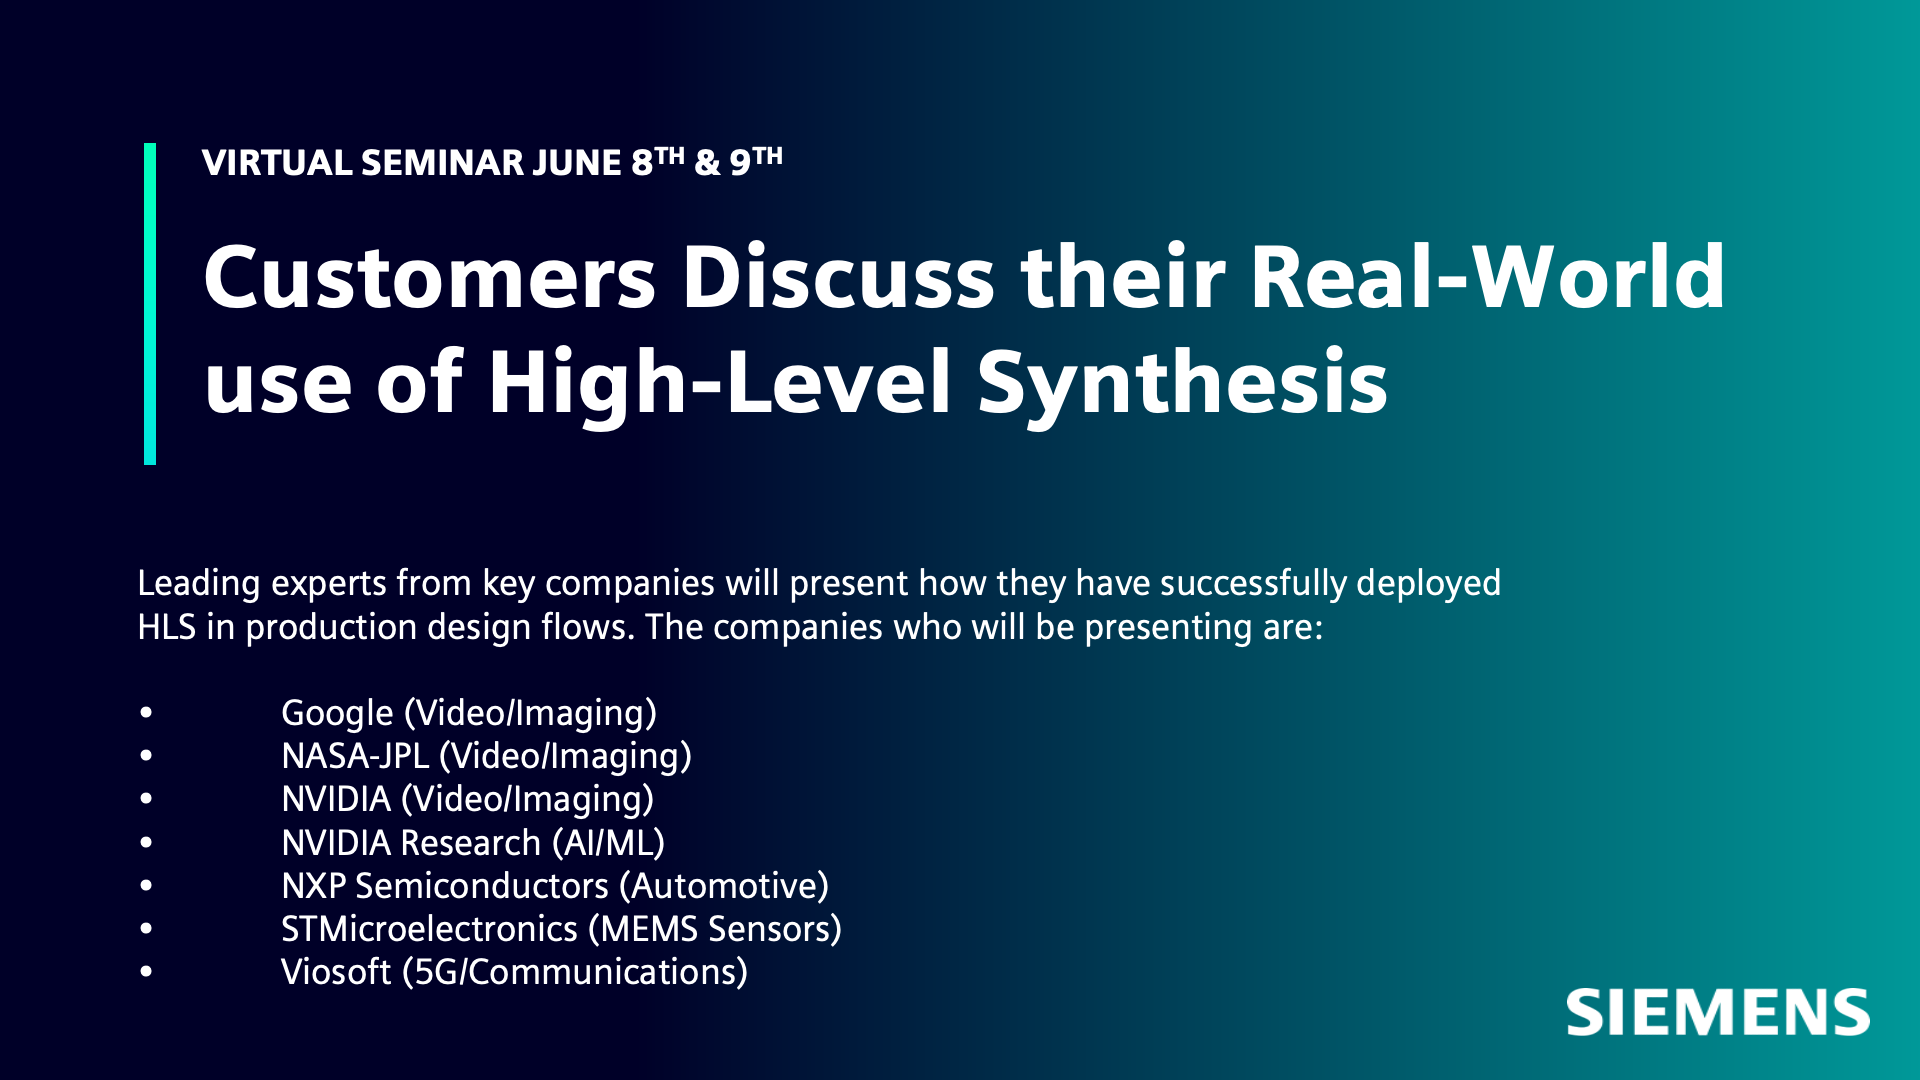 Customers Share Their Experiences Using High-Level Synthesis